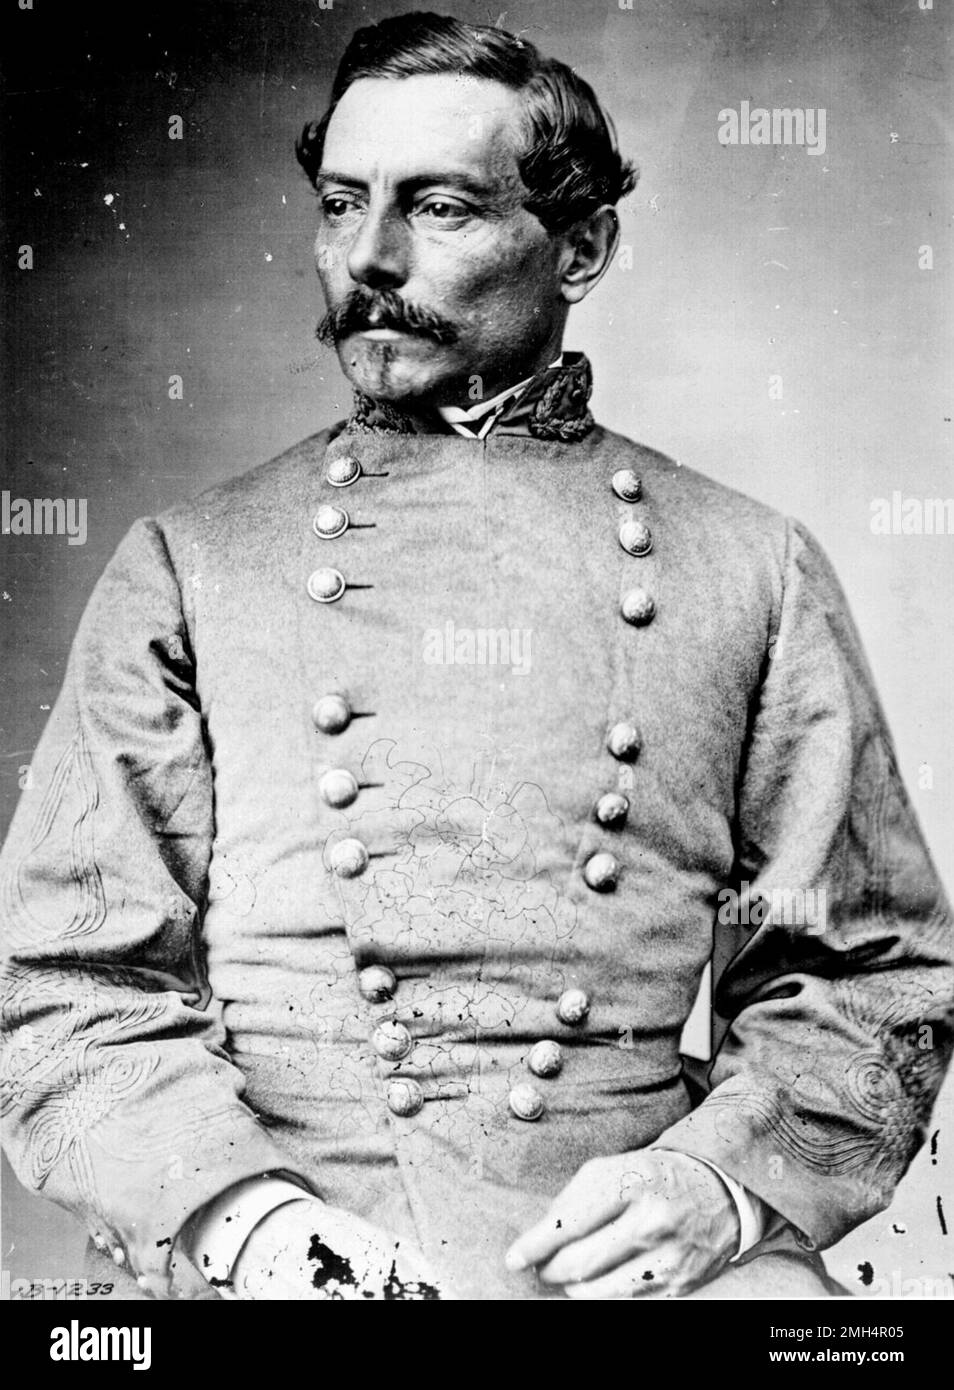 General Pierre Gustave Toutant de Beauregard, who was the Confederate commander of the bombardment of Fort Sumter. The Confederate bombardment and capture of Fort Sumter was the opening battle in the American Ciil War. Stock Photo